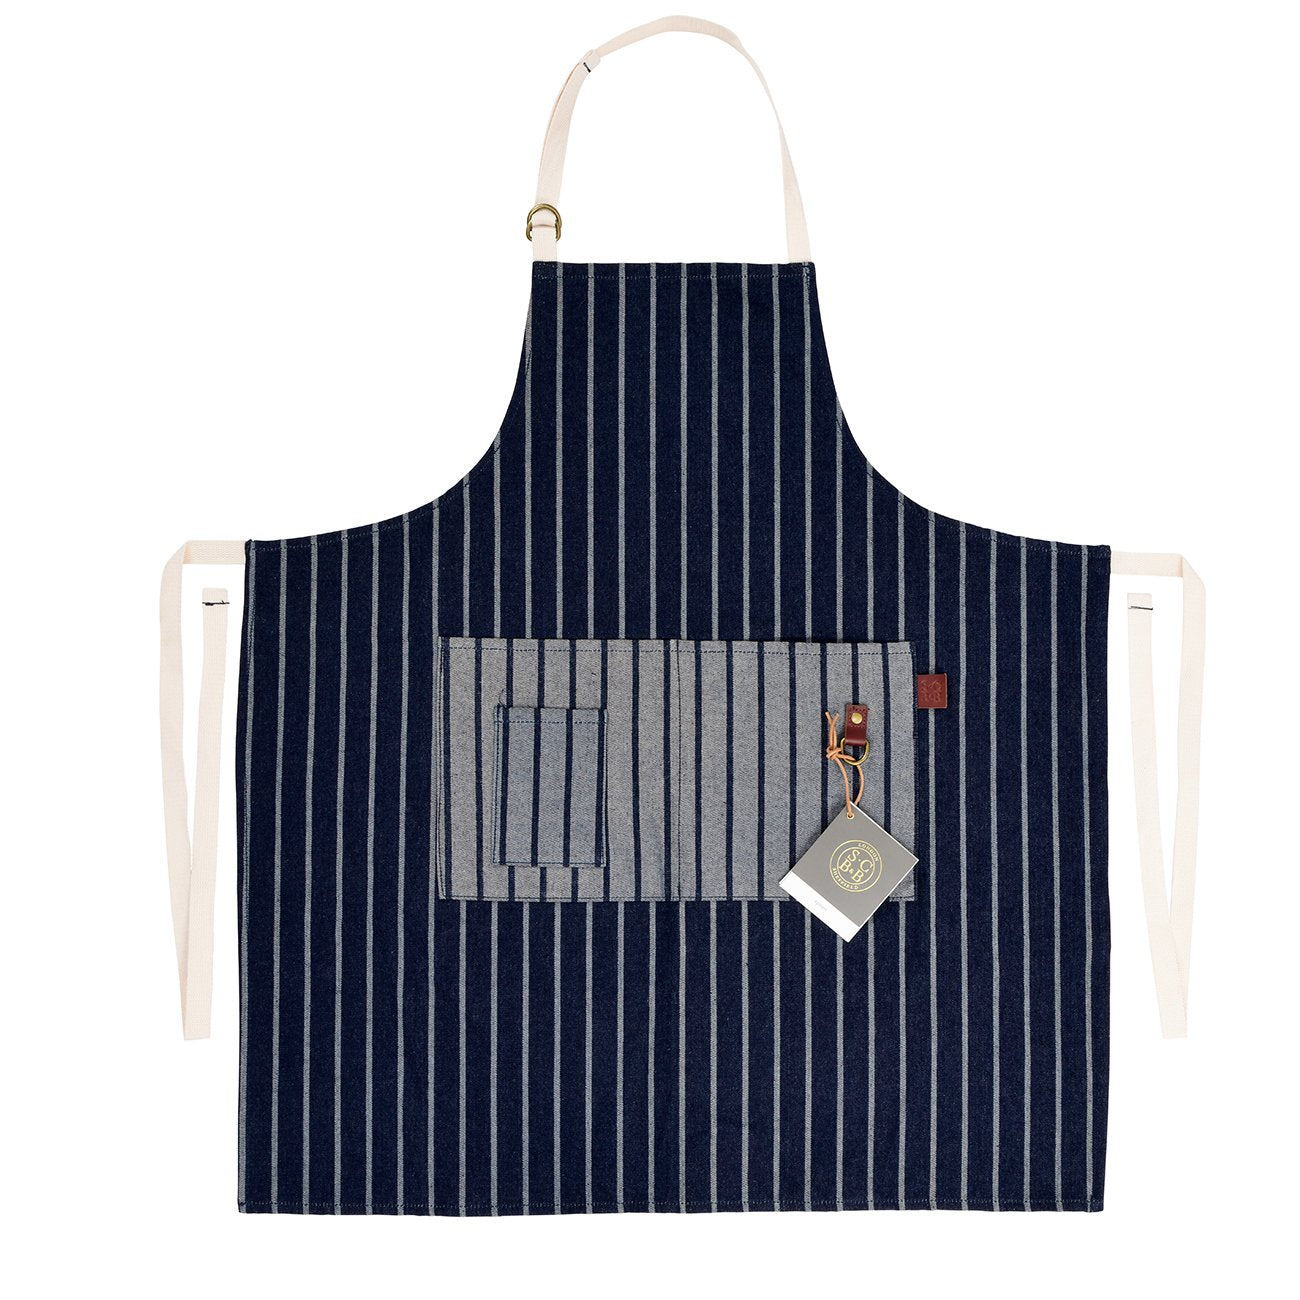 Discerning gardeners can garden in style, with this gorgeous-but-very-practical apron. This charming gardening accessory very much reflects Sophie’s signature style – classic, but with subtle contemporary design touches. 